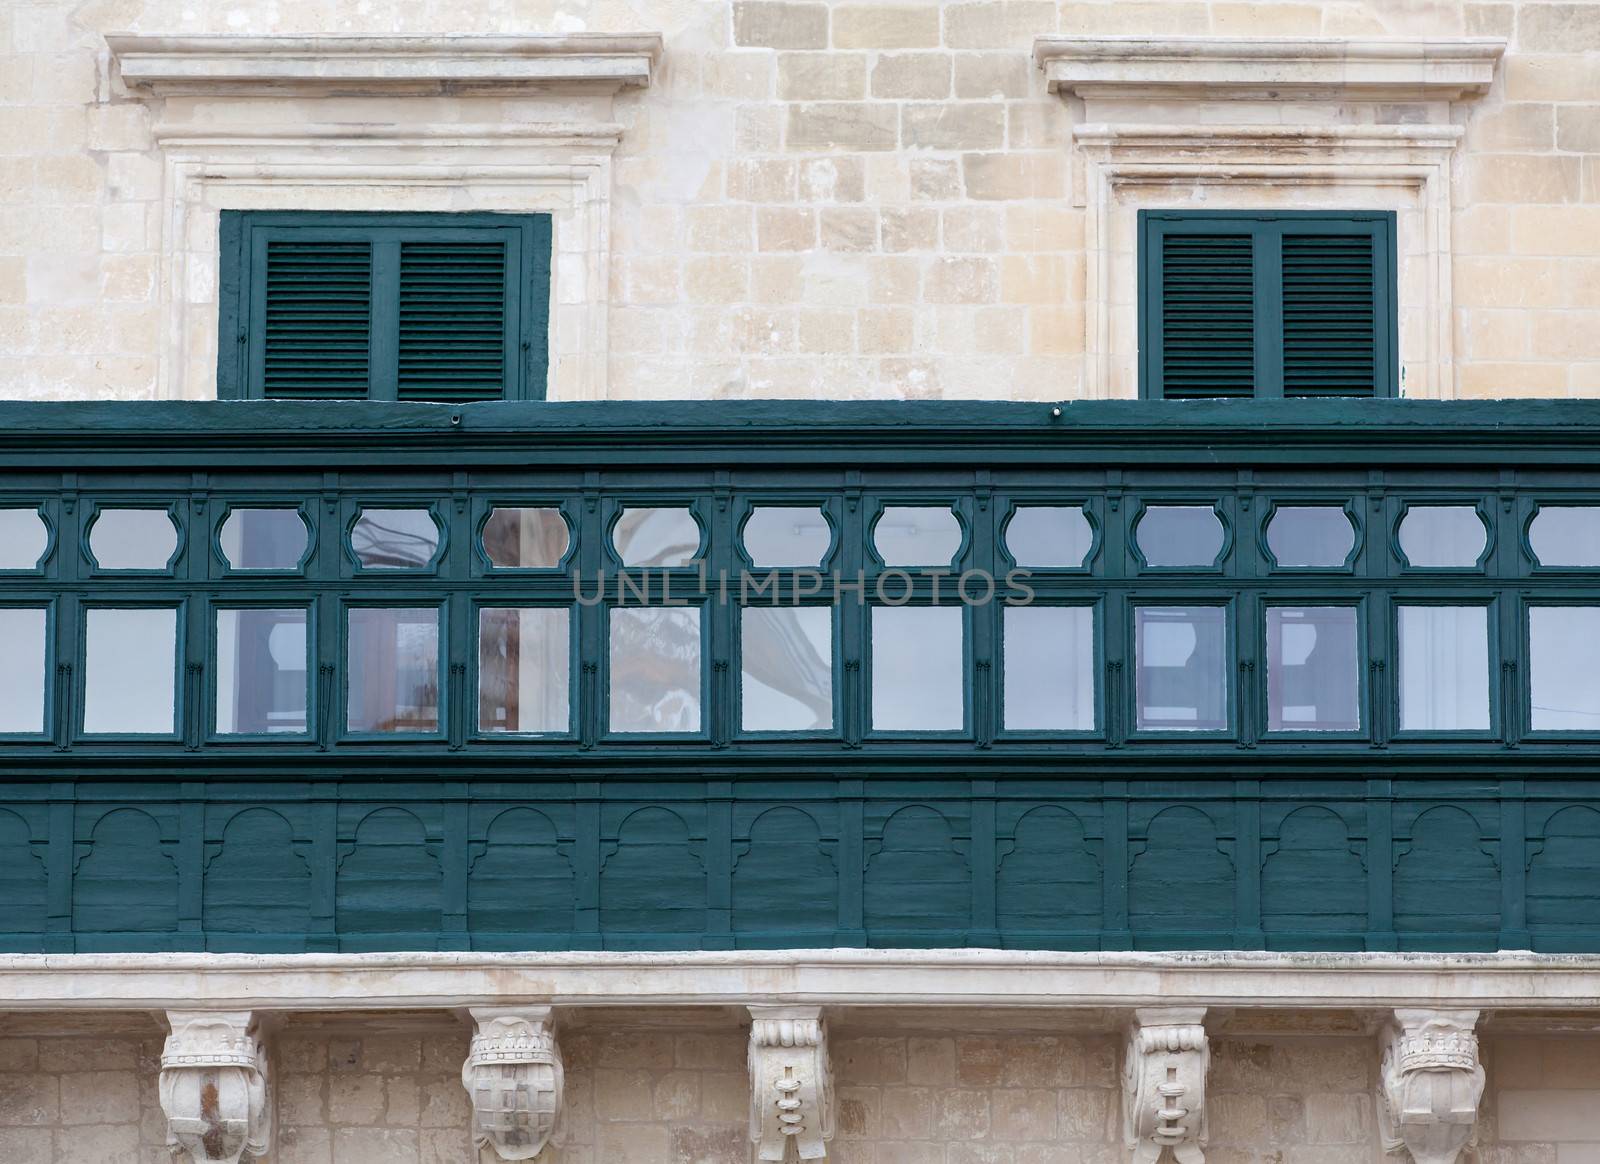 The wooden enclosed balcony of the Grandmaster's Palace in Valletta, Malta.